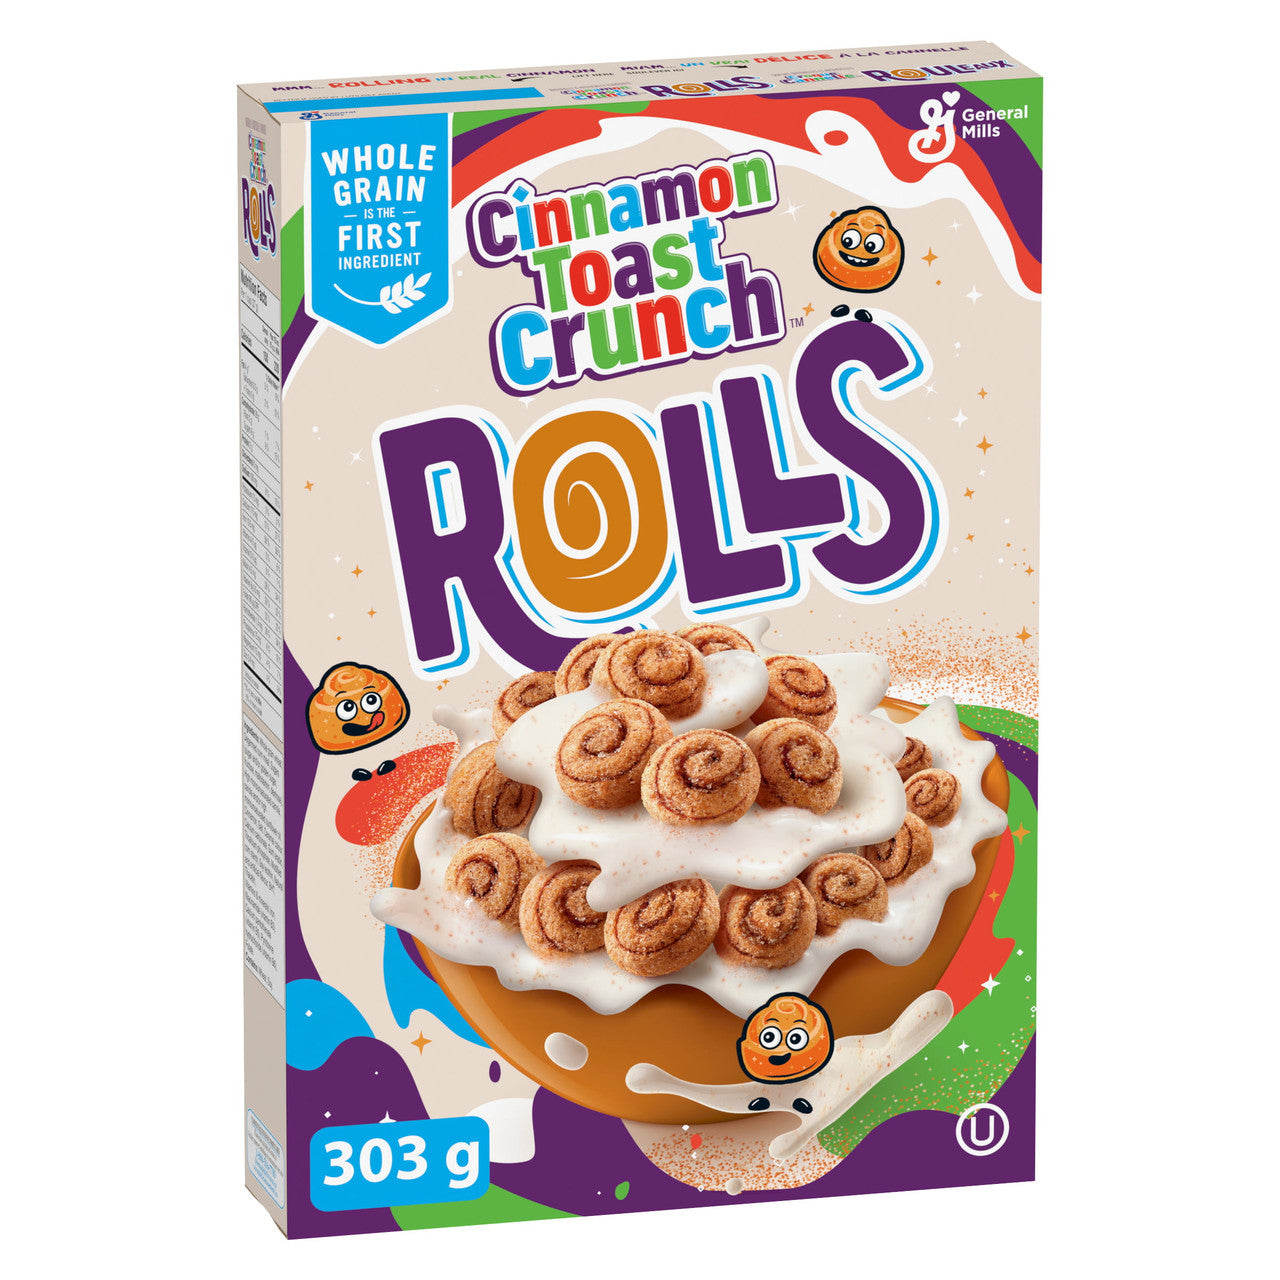 Cinnamon Toast Crunch Rolls Cereal, 303g/10.6 oz. Box {Imported from Canada}